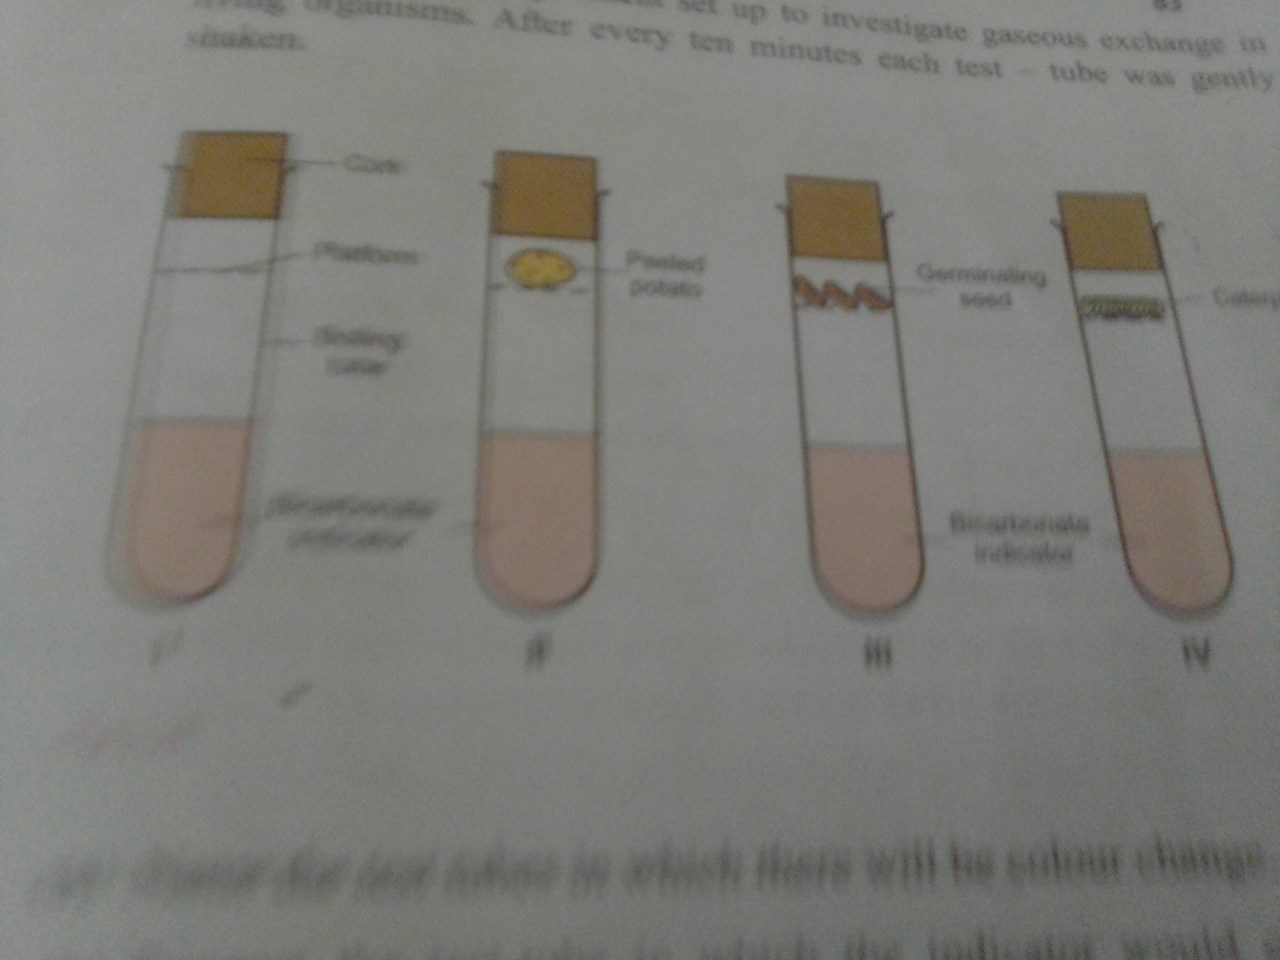 Name the test tubes in which there will be color change?